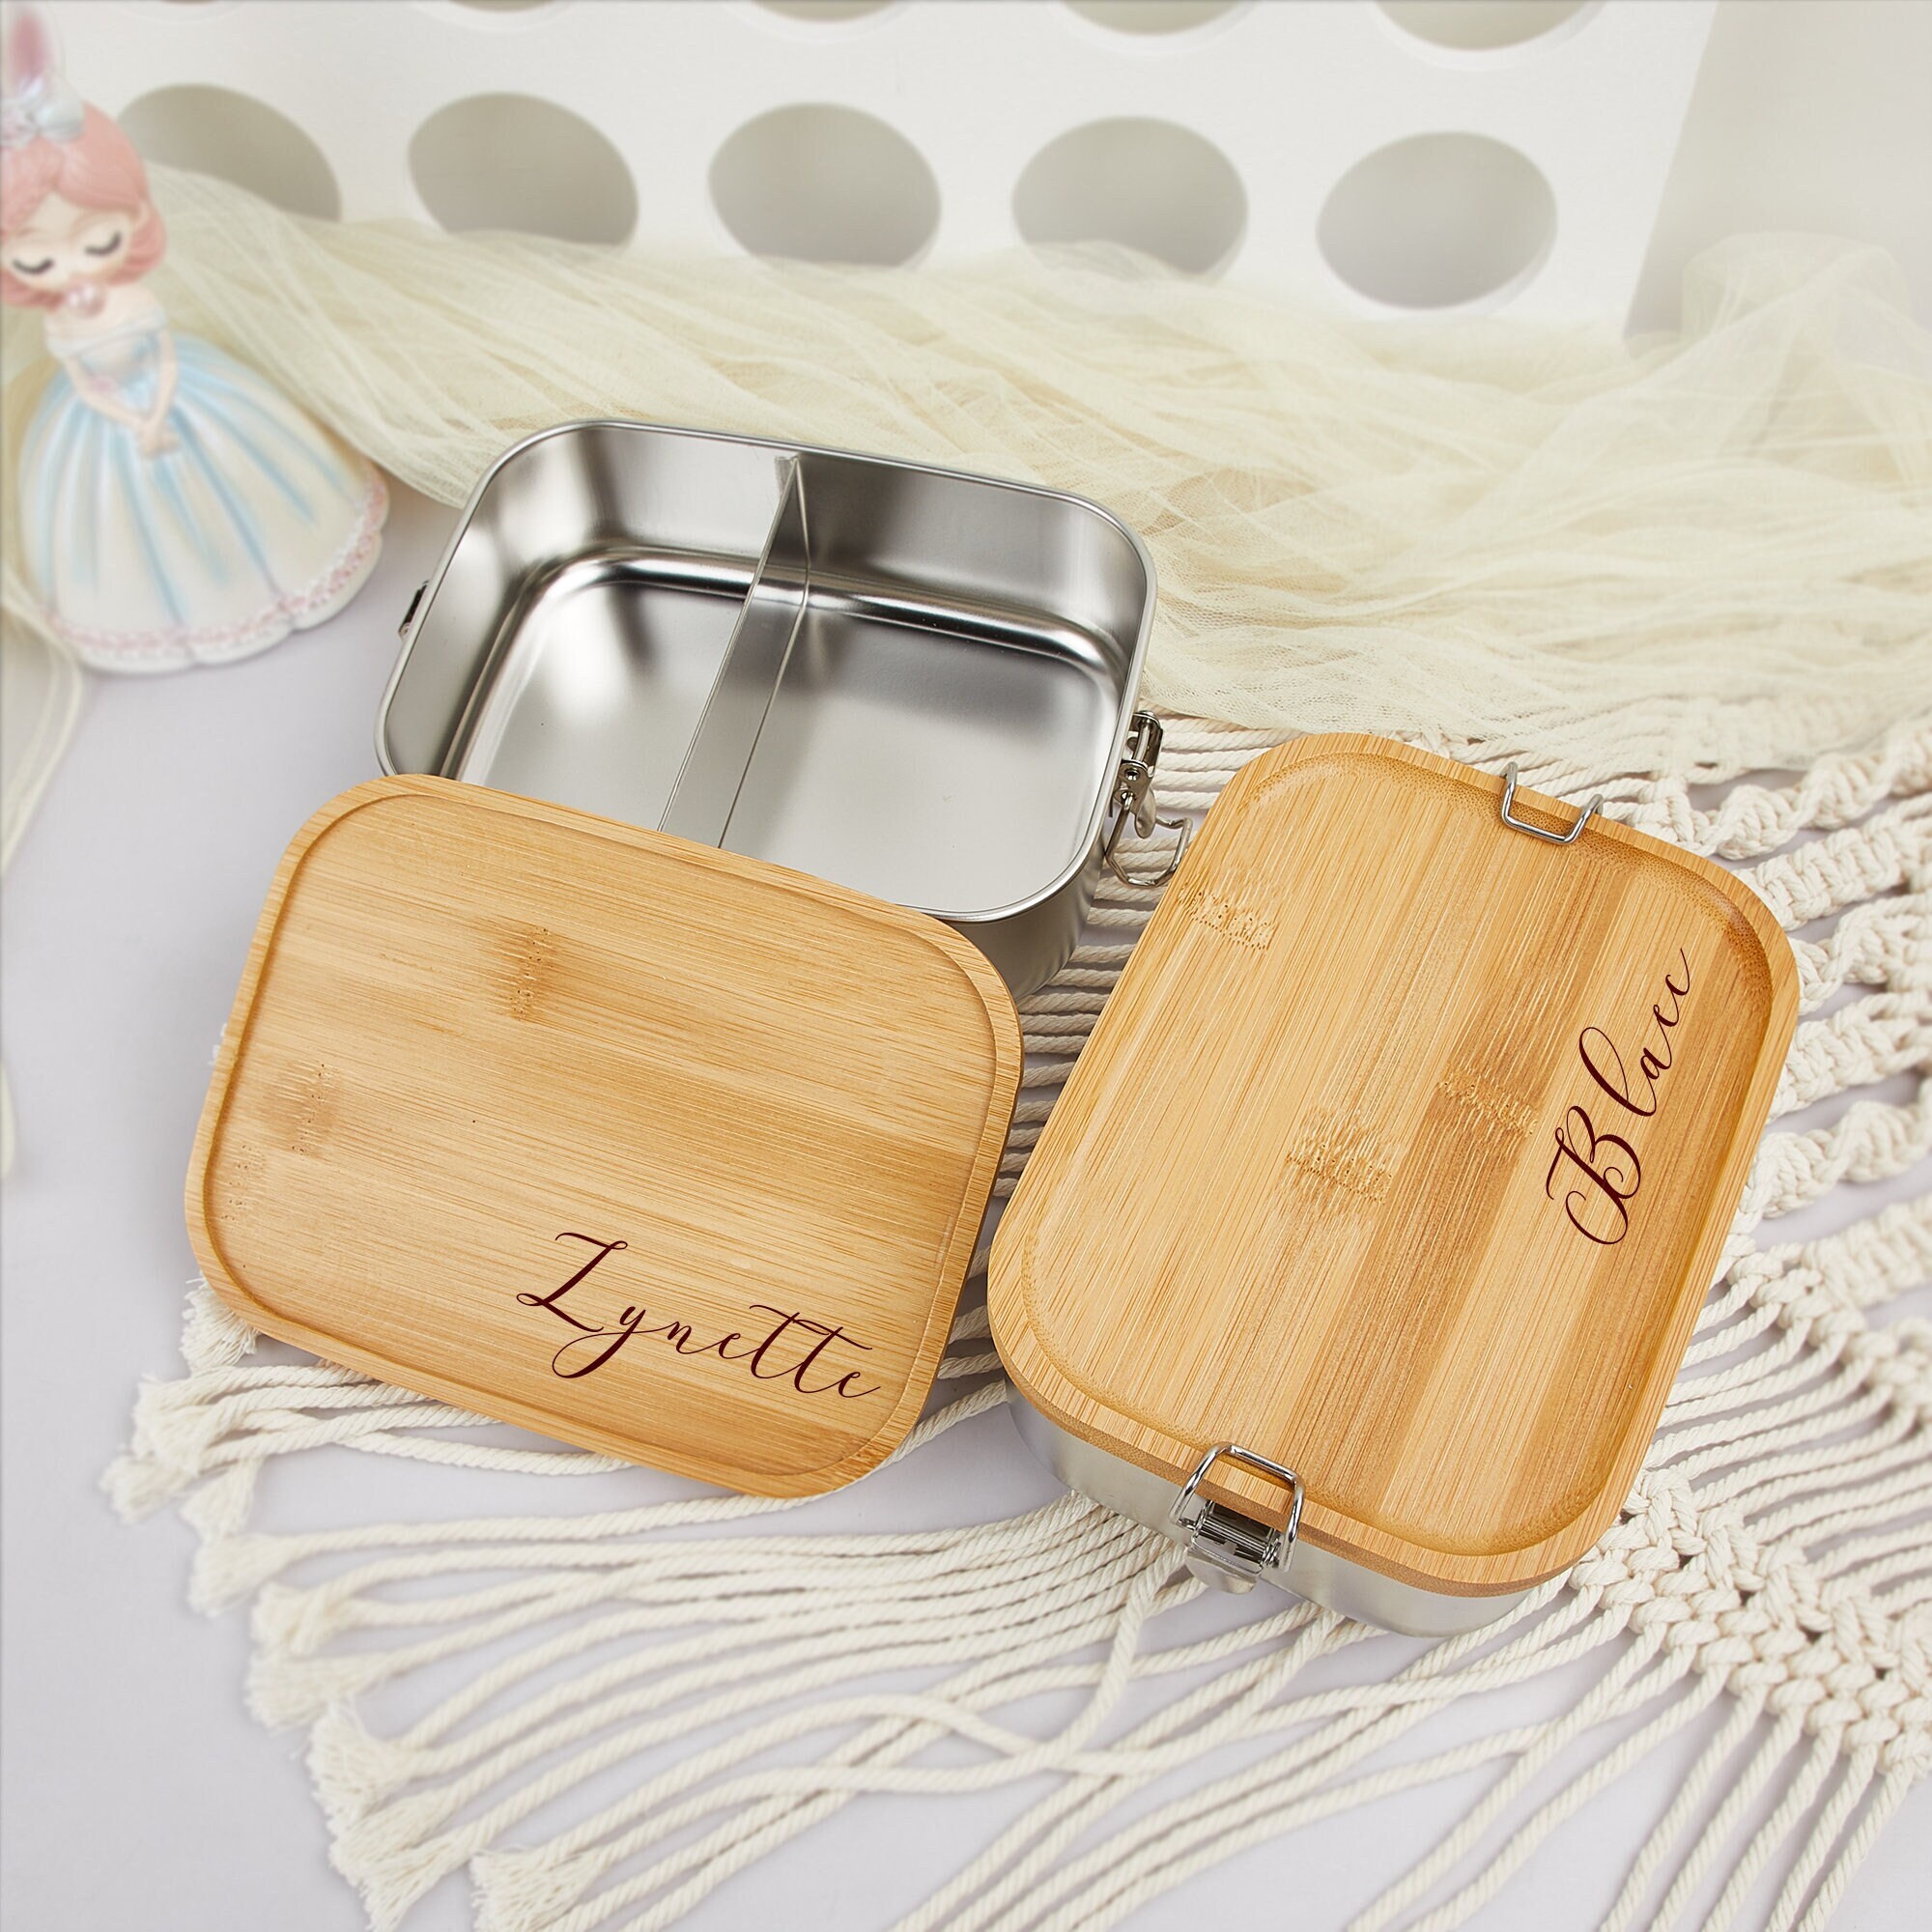 Stainless Steel Bento Lunch Box with Bamboo Lid, Metal Lunch Containers Snack Food for Adults & Kids School/ Work 600ml White